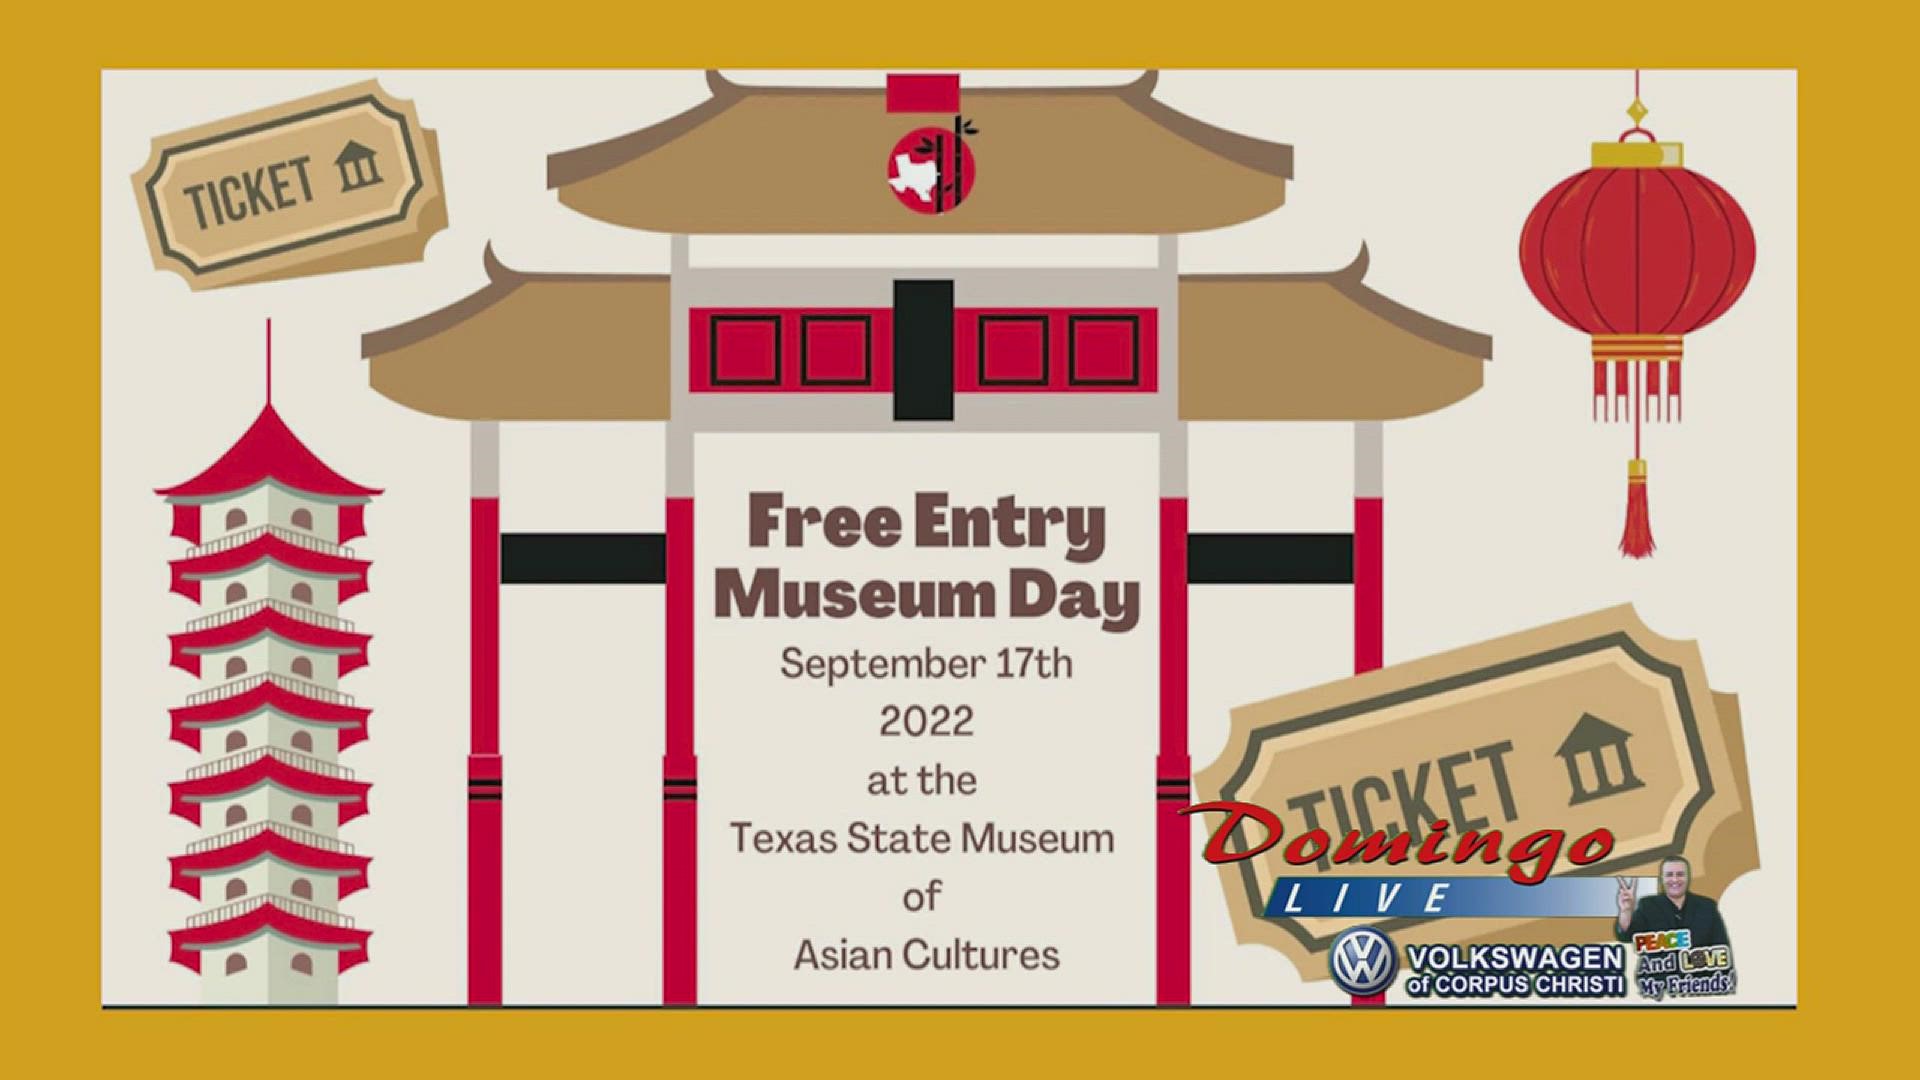 Domingo Live: Texas State Museum of Asian Cultures "Free Entry Day"